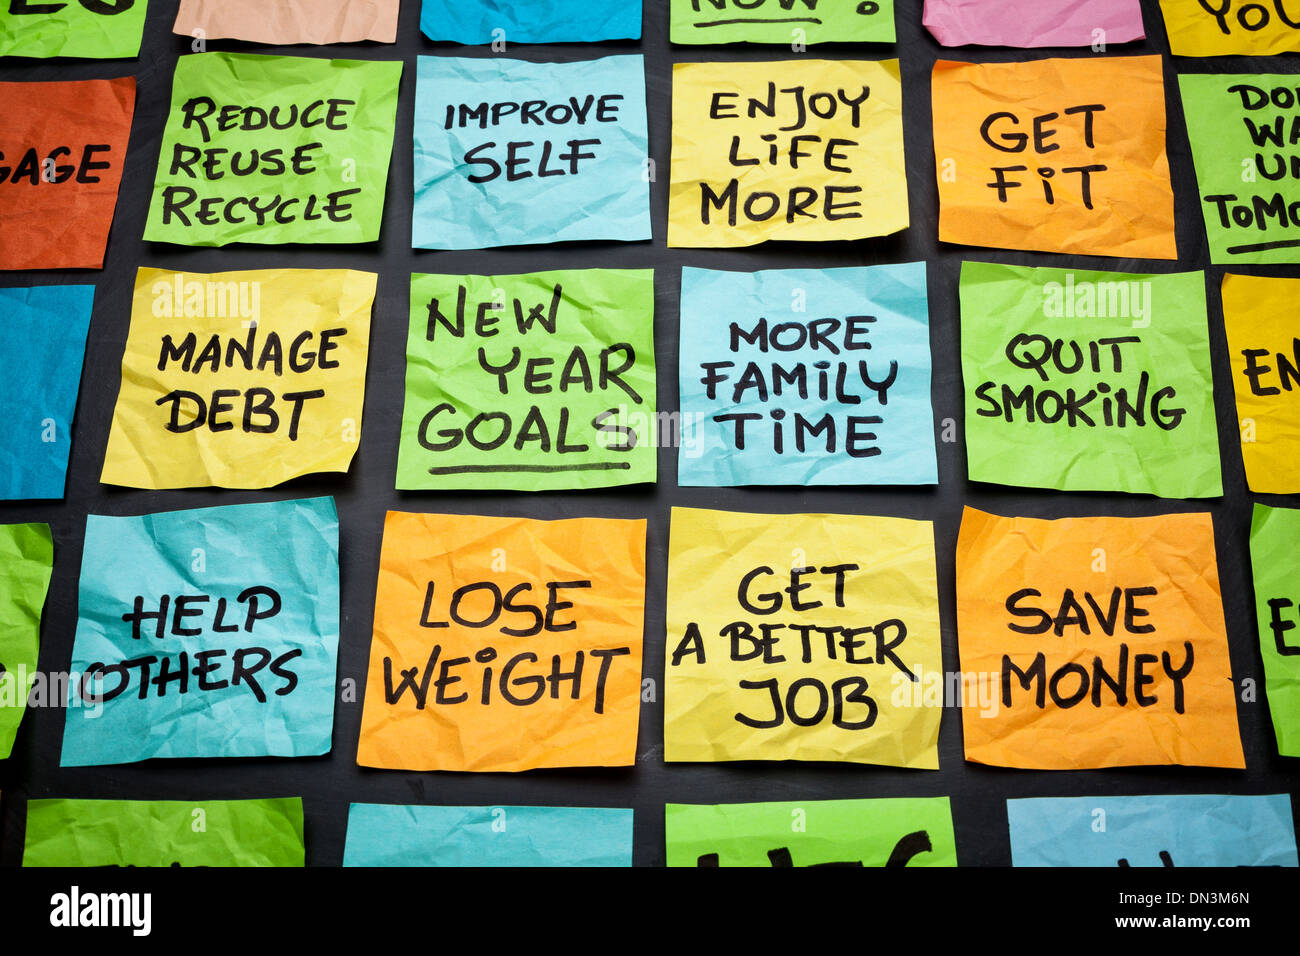 popular new year goals or resolutions - colorful sticky notes on a blackboard Stock Photo